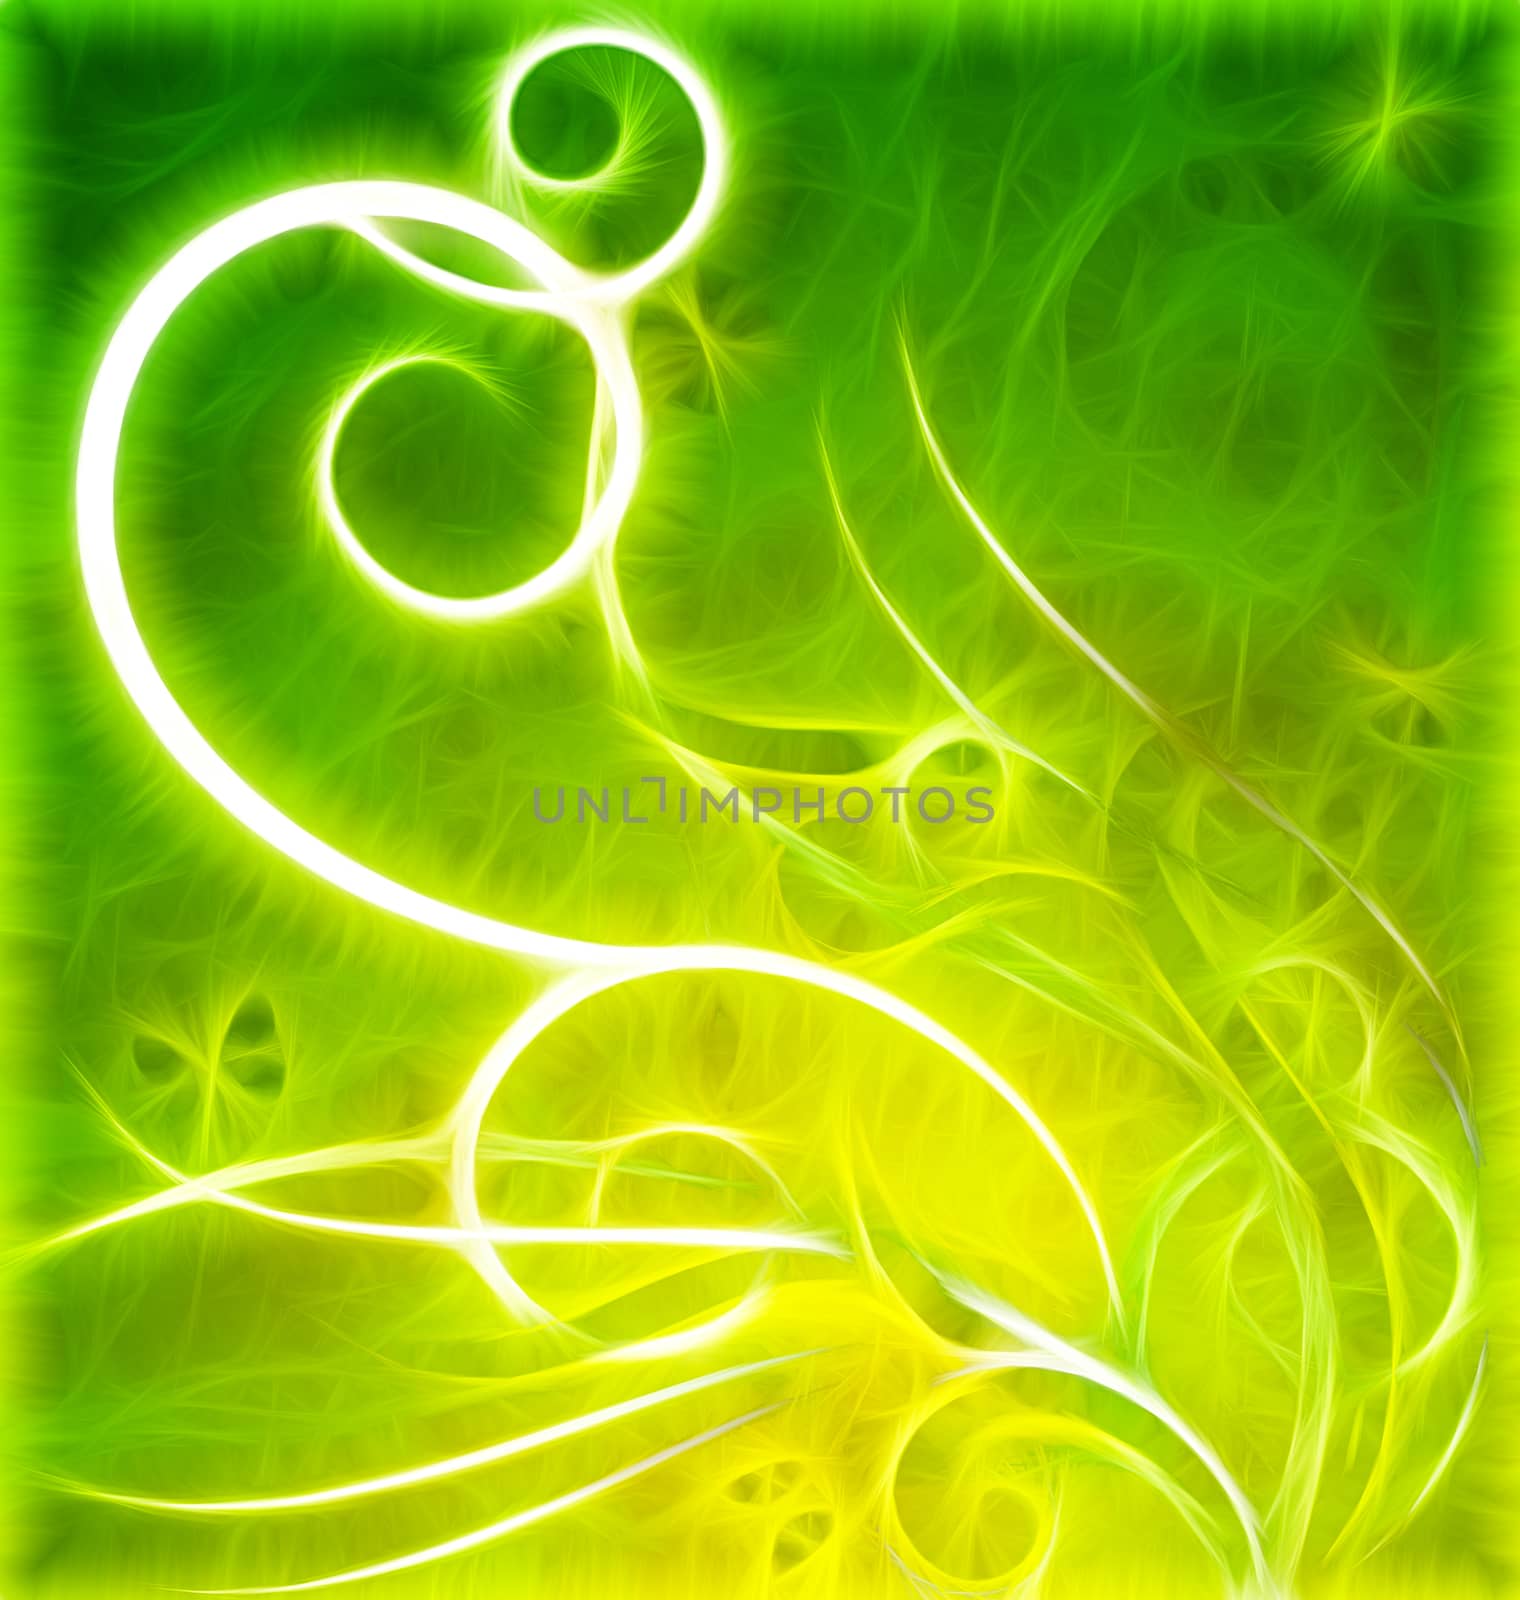 Green grunge abstract eco background